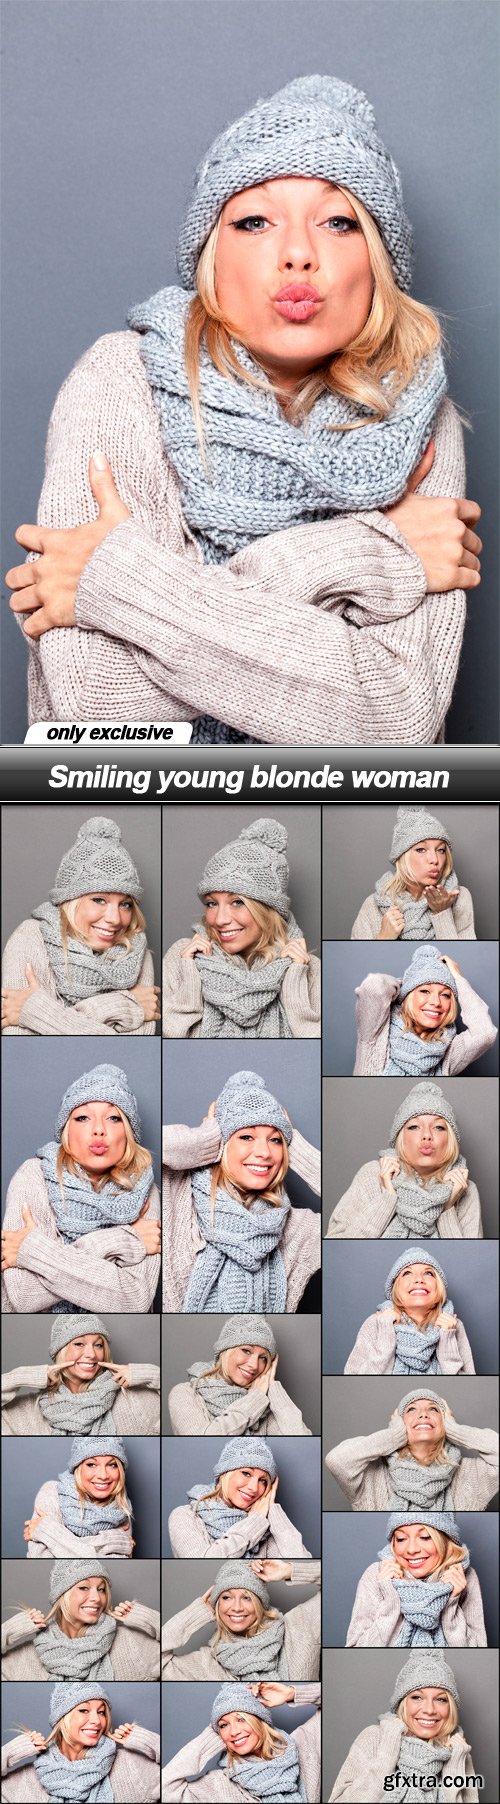 Smiling young blonde woman - 19 UHQ JPEG